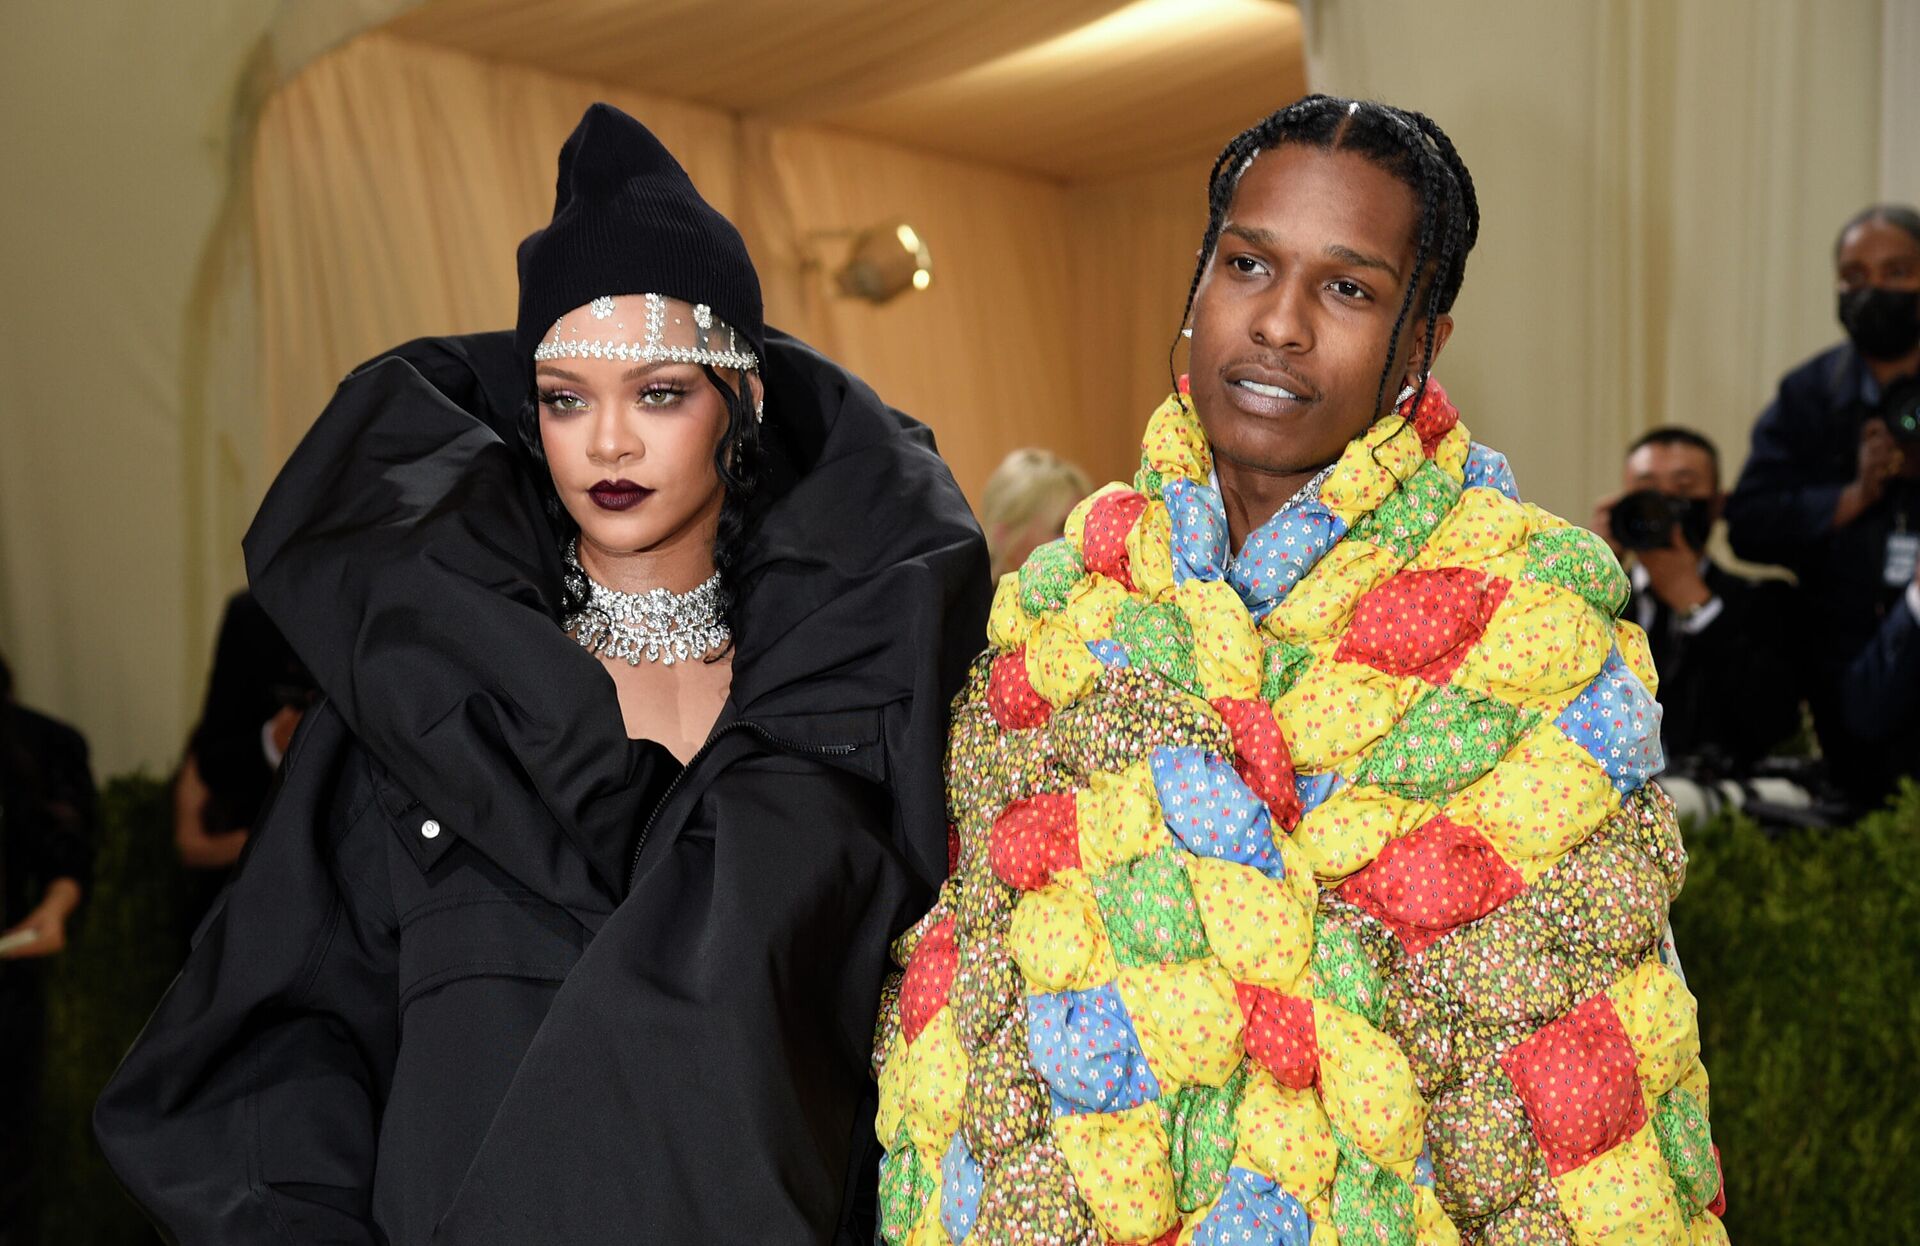 Rihanna, left, and ASAP Rocky attend The Metropolitan Museum of Art's Costume Institute benefit gala celebrating the opening of the In America: A Lexicon of Fashion exhibition on Monday, Sept. 13, 2021, in New York - Sputnik International, 1920, 01.02.2022